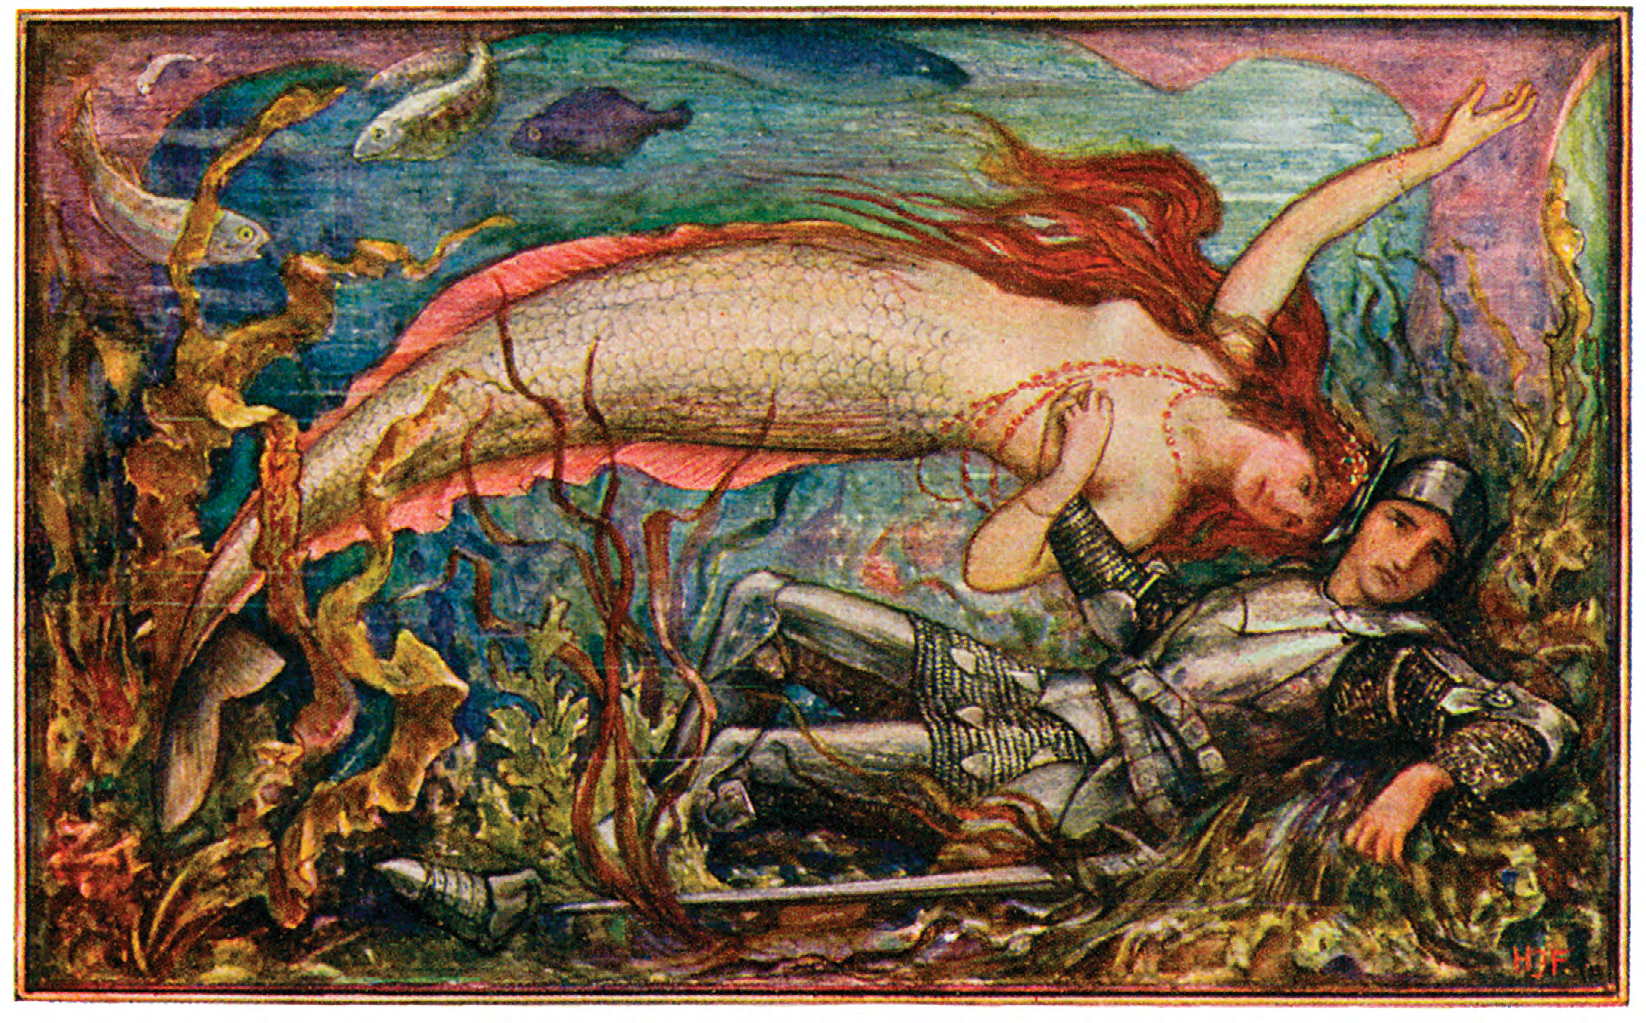 H. J. Ford for Andrew Lang’s “The Brown Fairy Book”. Wikimedia Commons.